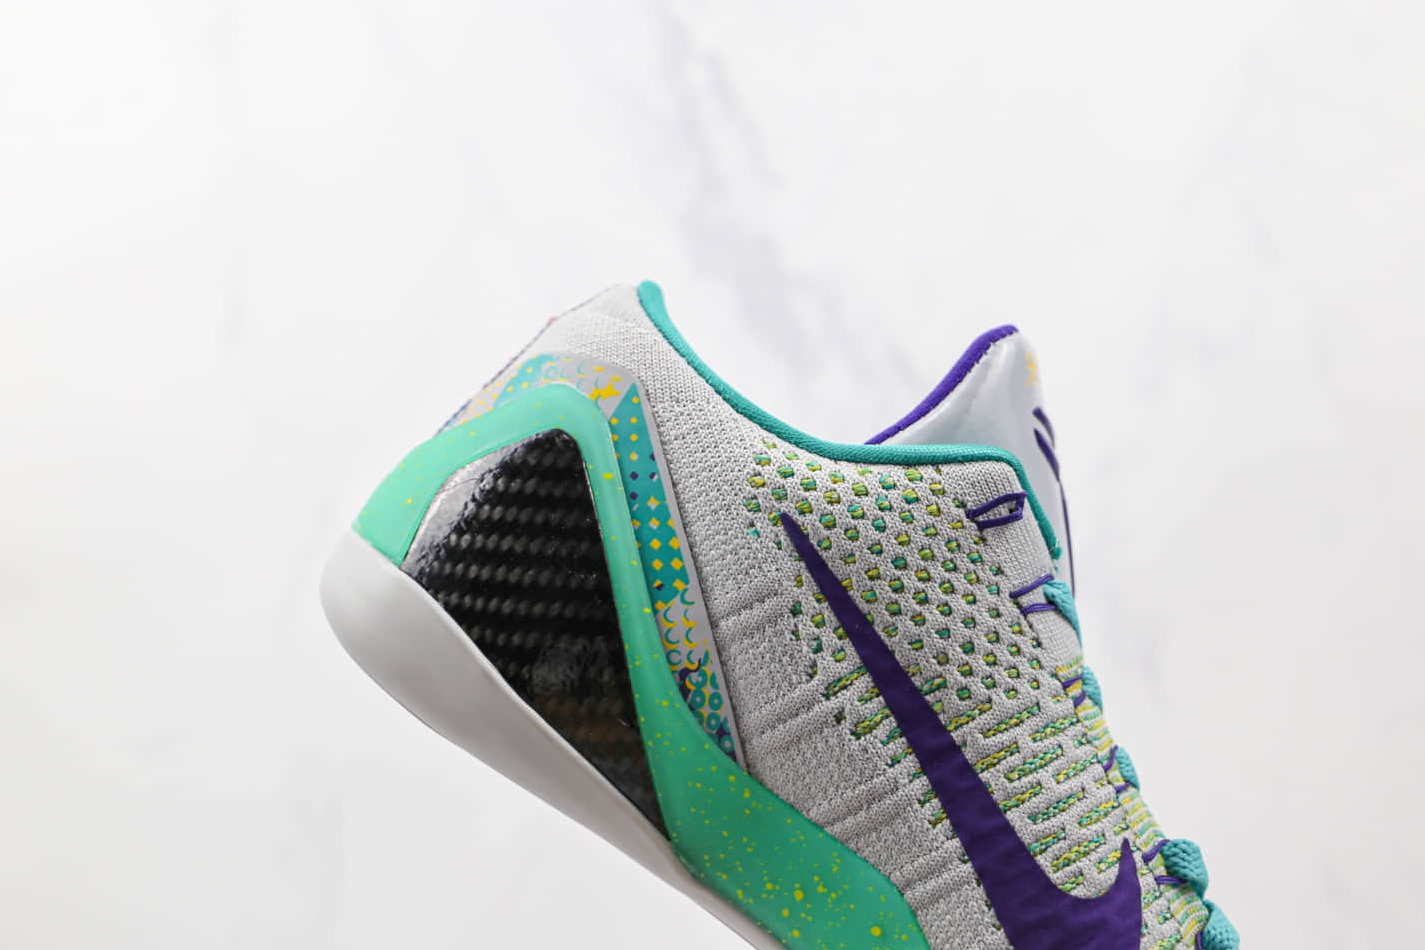 Nike Zoom Kobe 9 IX Grey Green Purple Shoes 630487-005 | Superior Performance and Style for Basketball Enthusiasts